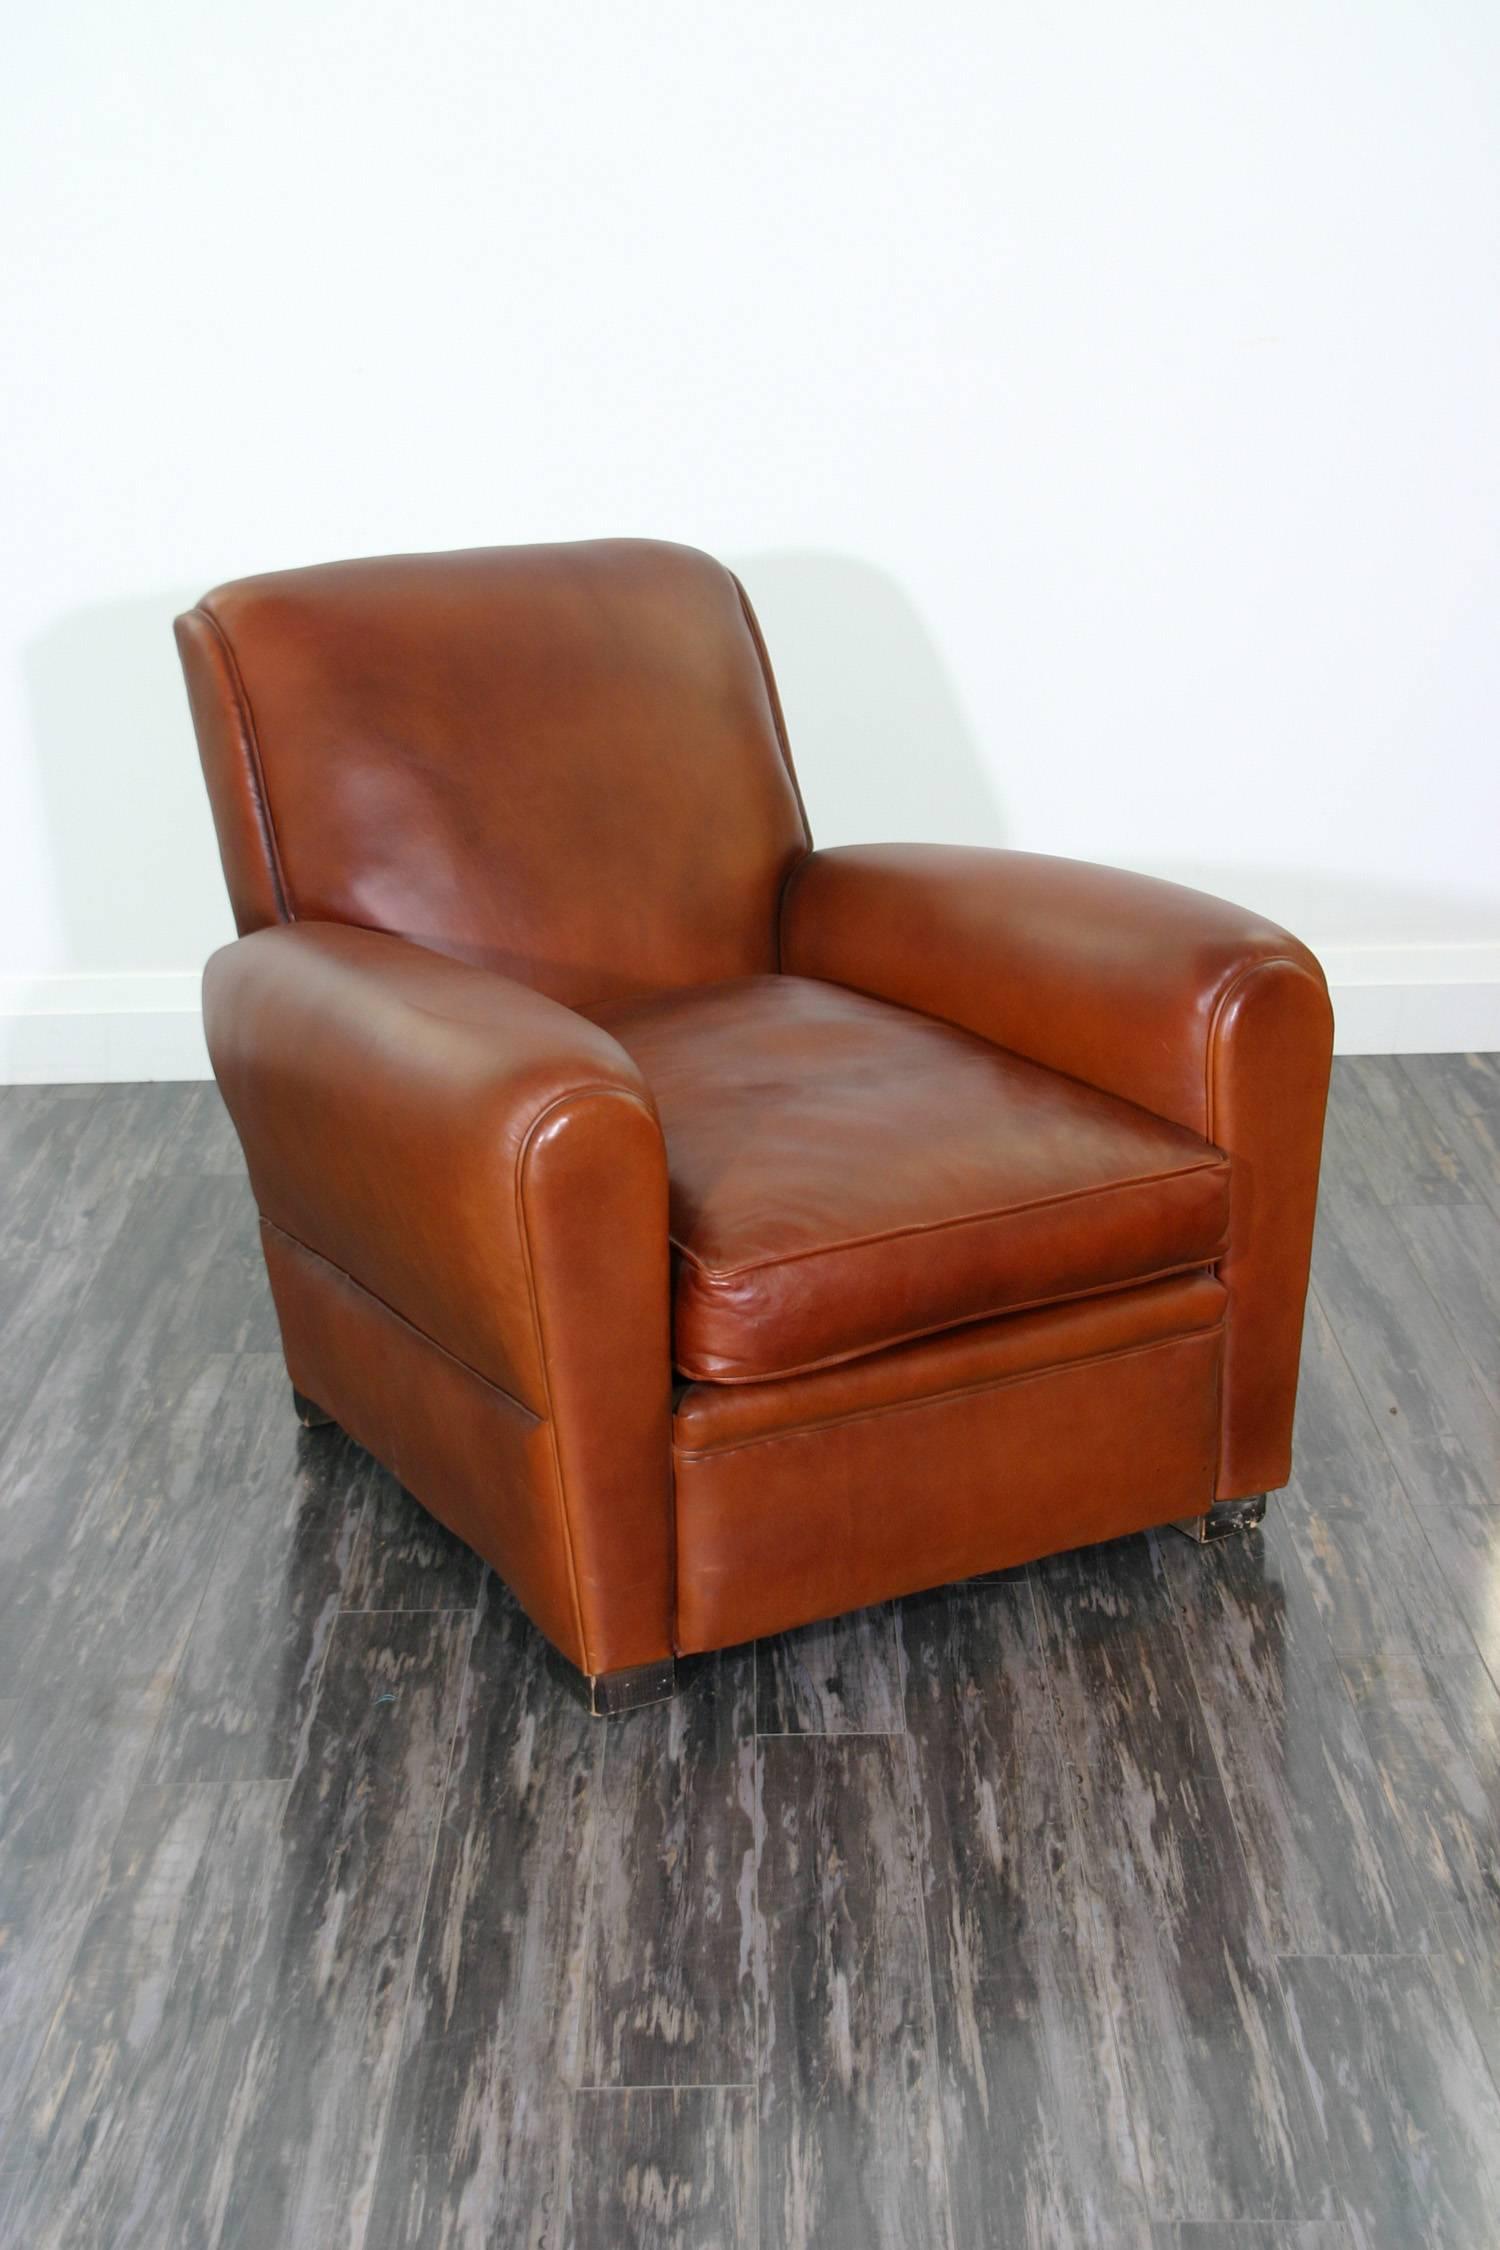 Pair of Leather Club Chairs In Excellent Condition For Sale In Mississauga, ON